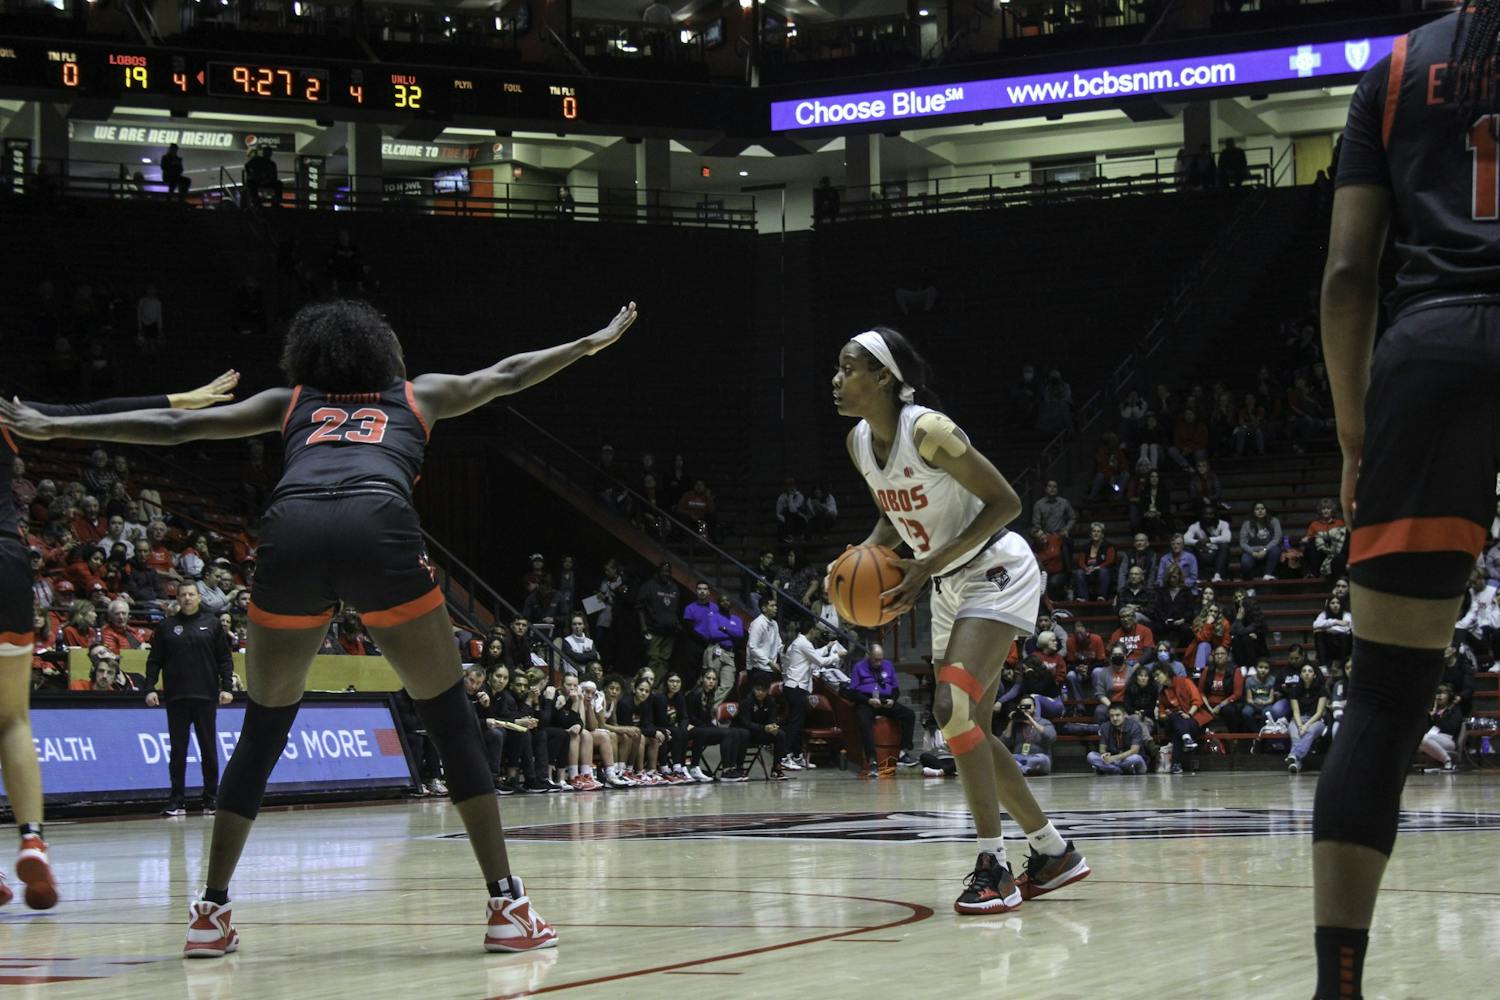 Women's basketball: Lobos look competitive in loss against UNLV